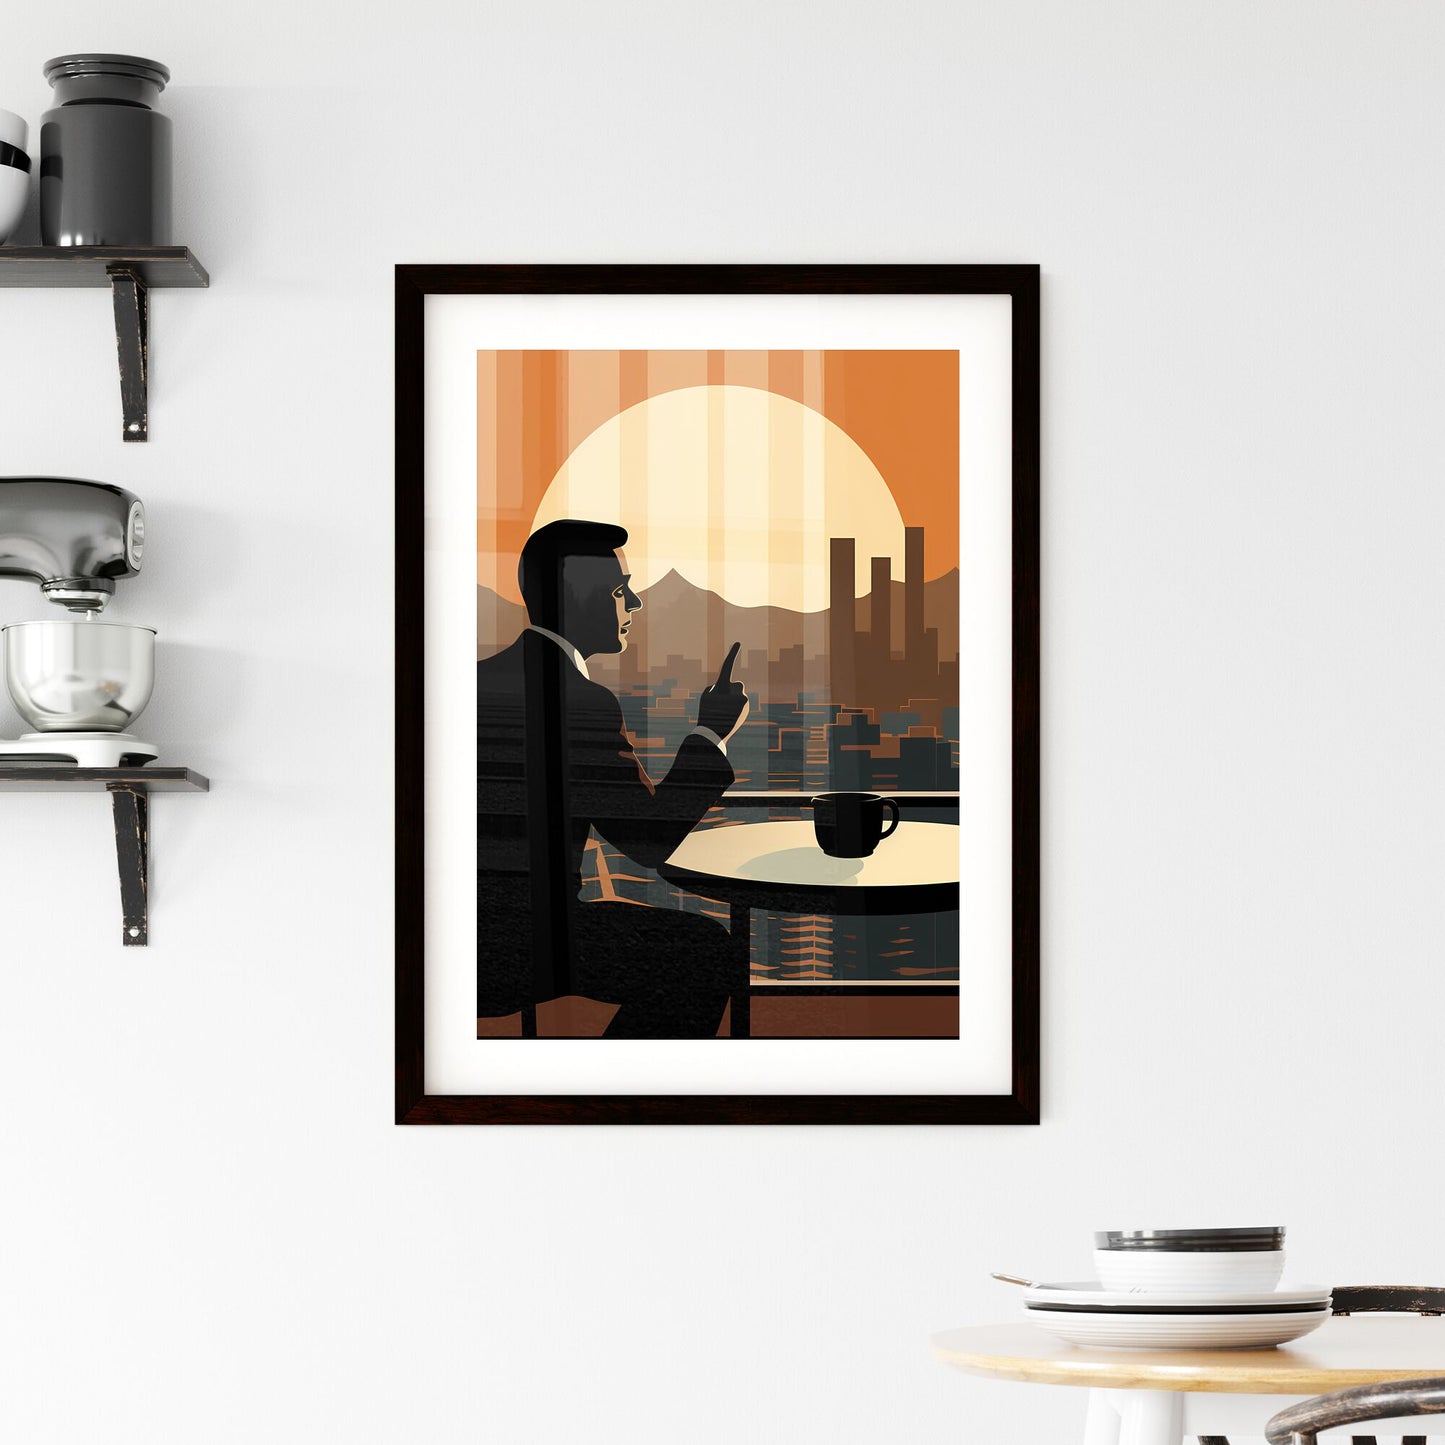 Today, your inner voice is louder and clearer - Art print of a man sitting at a table looking out a window Default Title